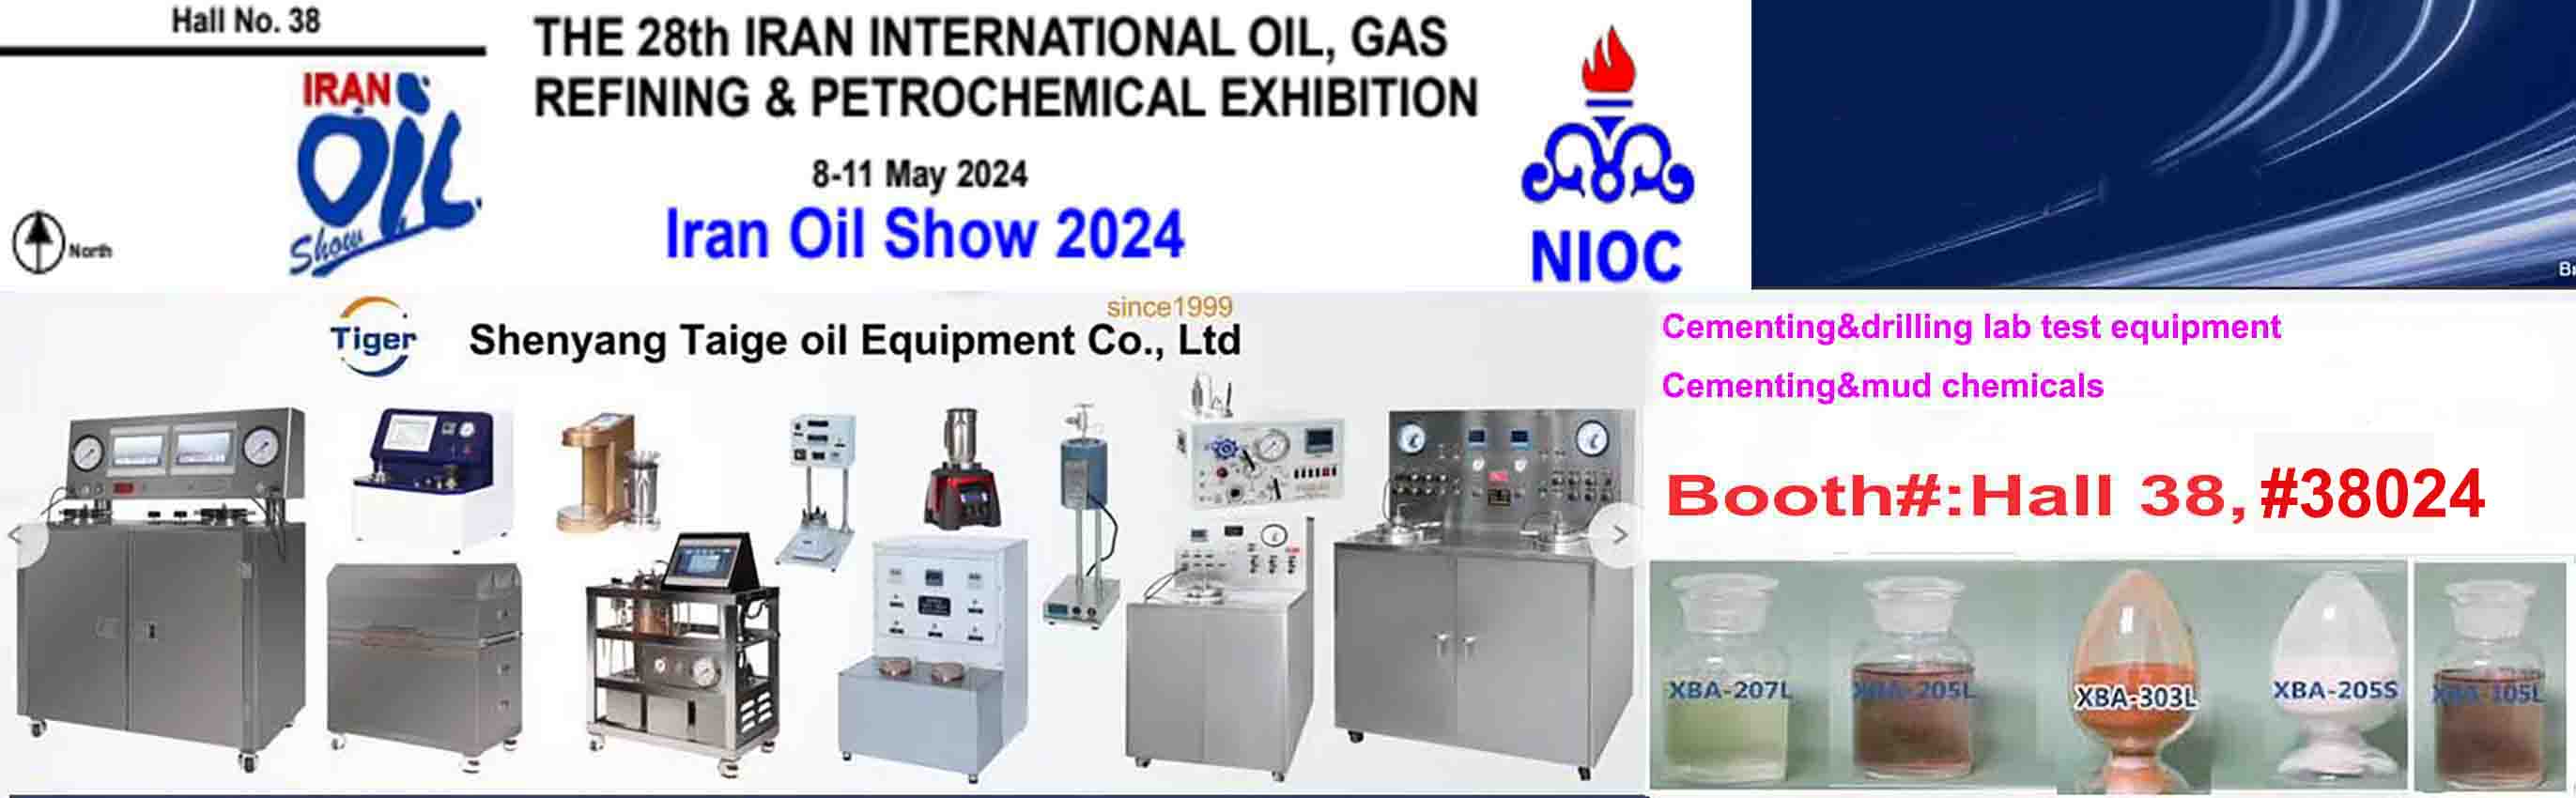 Iran Oil Show 2024, Shenyang Taige Oil Equipment will attend